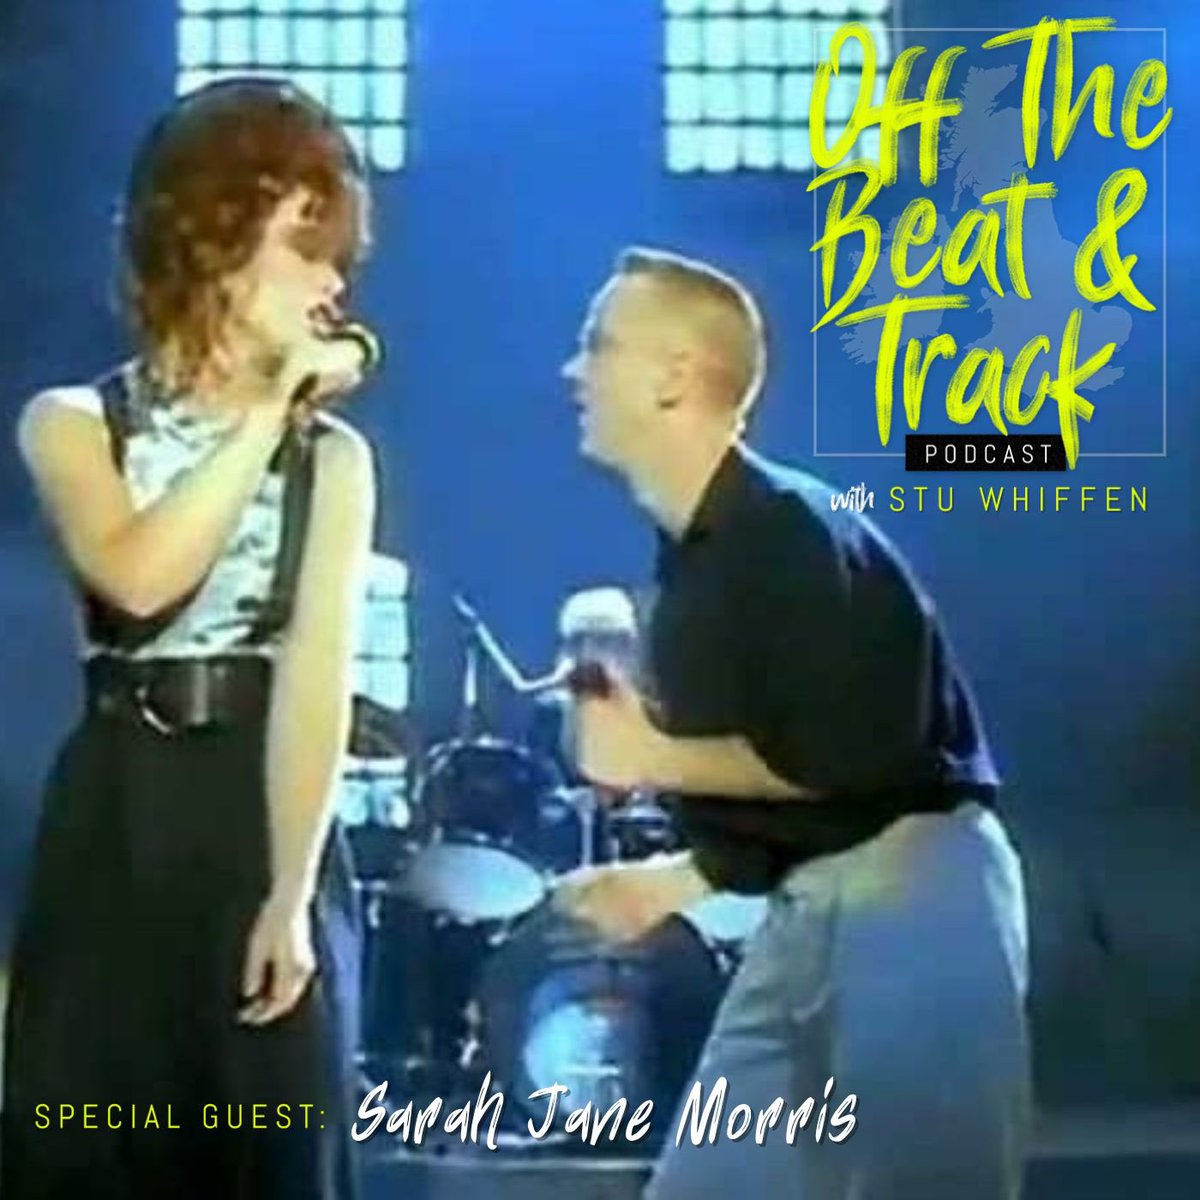 NEW @beatandtrackpod EPISODE @stuwhiffen sits down with the delightful Sarah Jane Morris to talk music & so much more Link in bio Or open.spotify.com/episode/04kJjA…